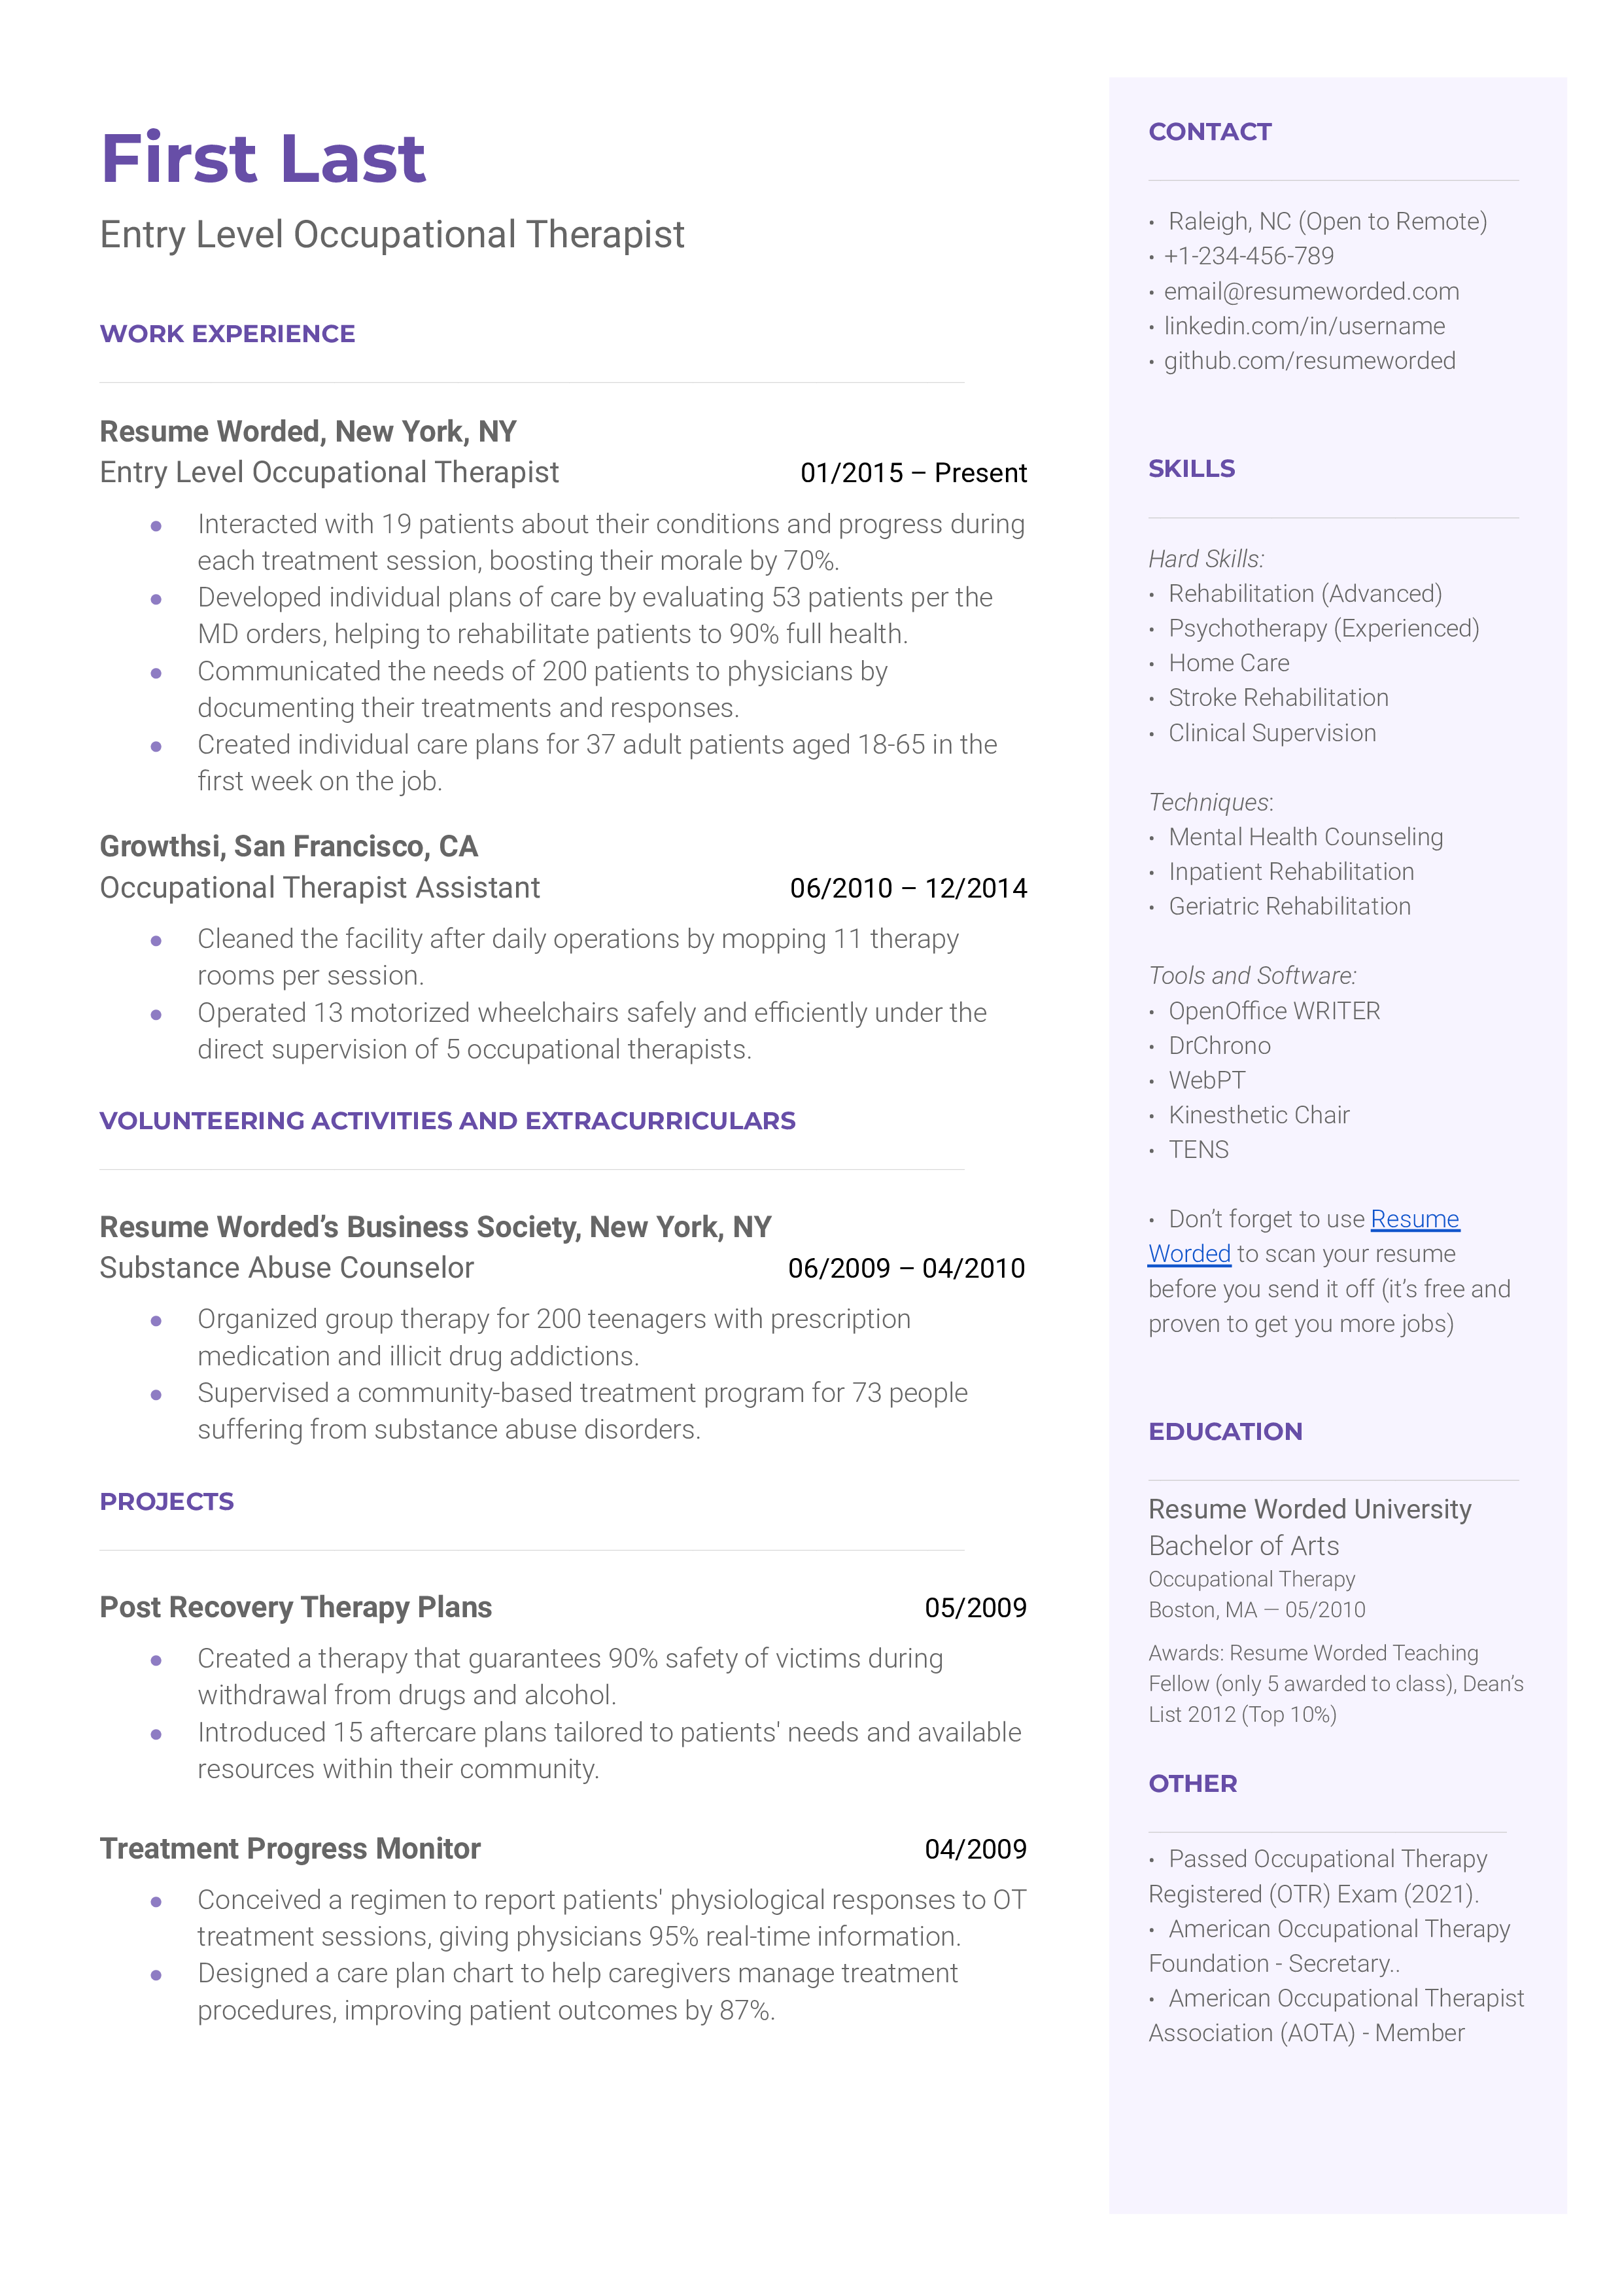 Entry-Level Occupational Therapist Resume Sample